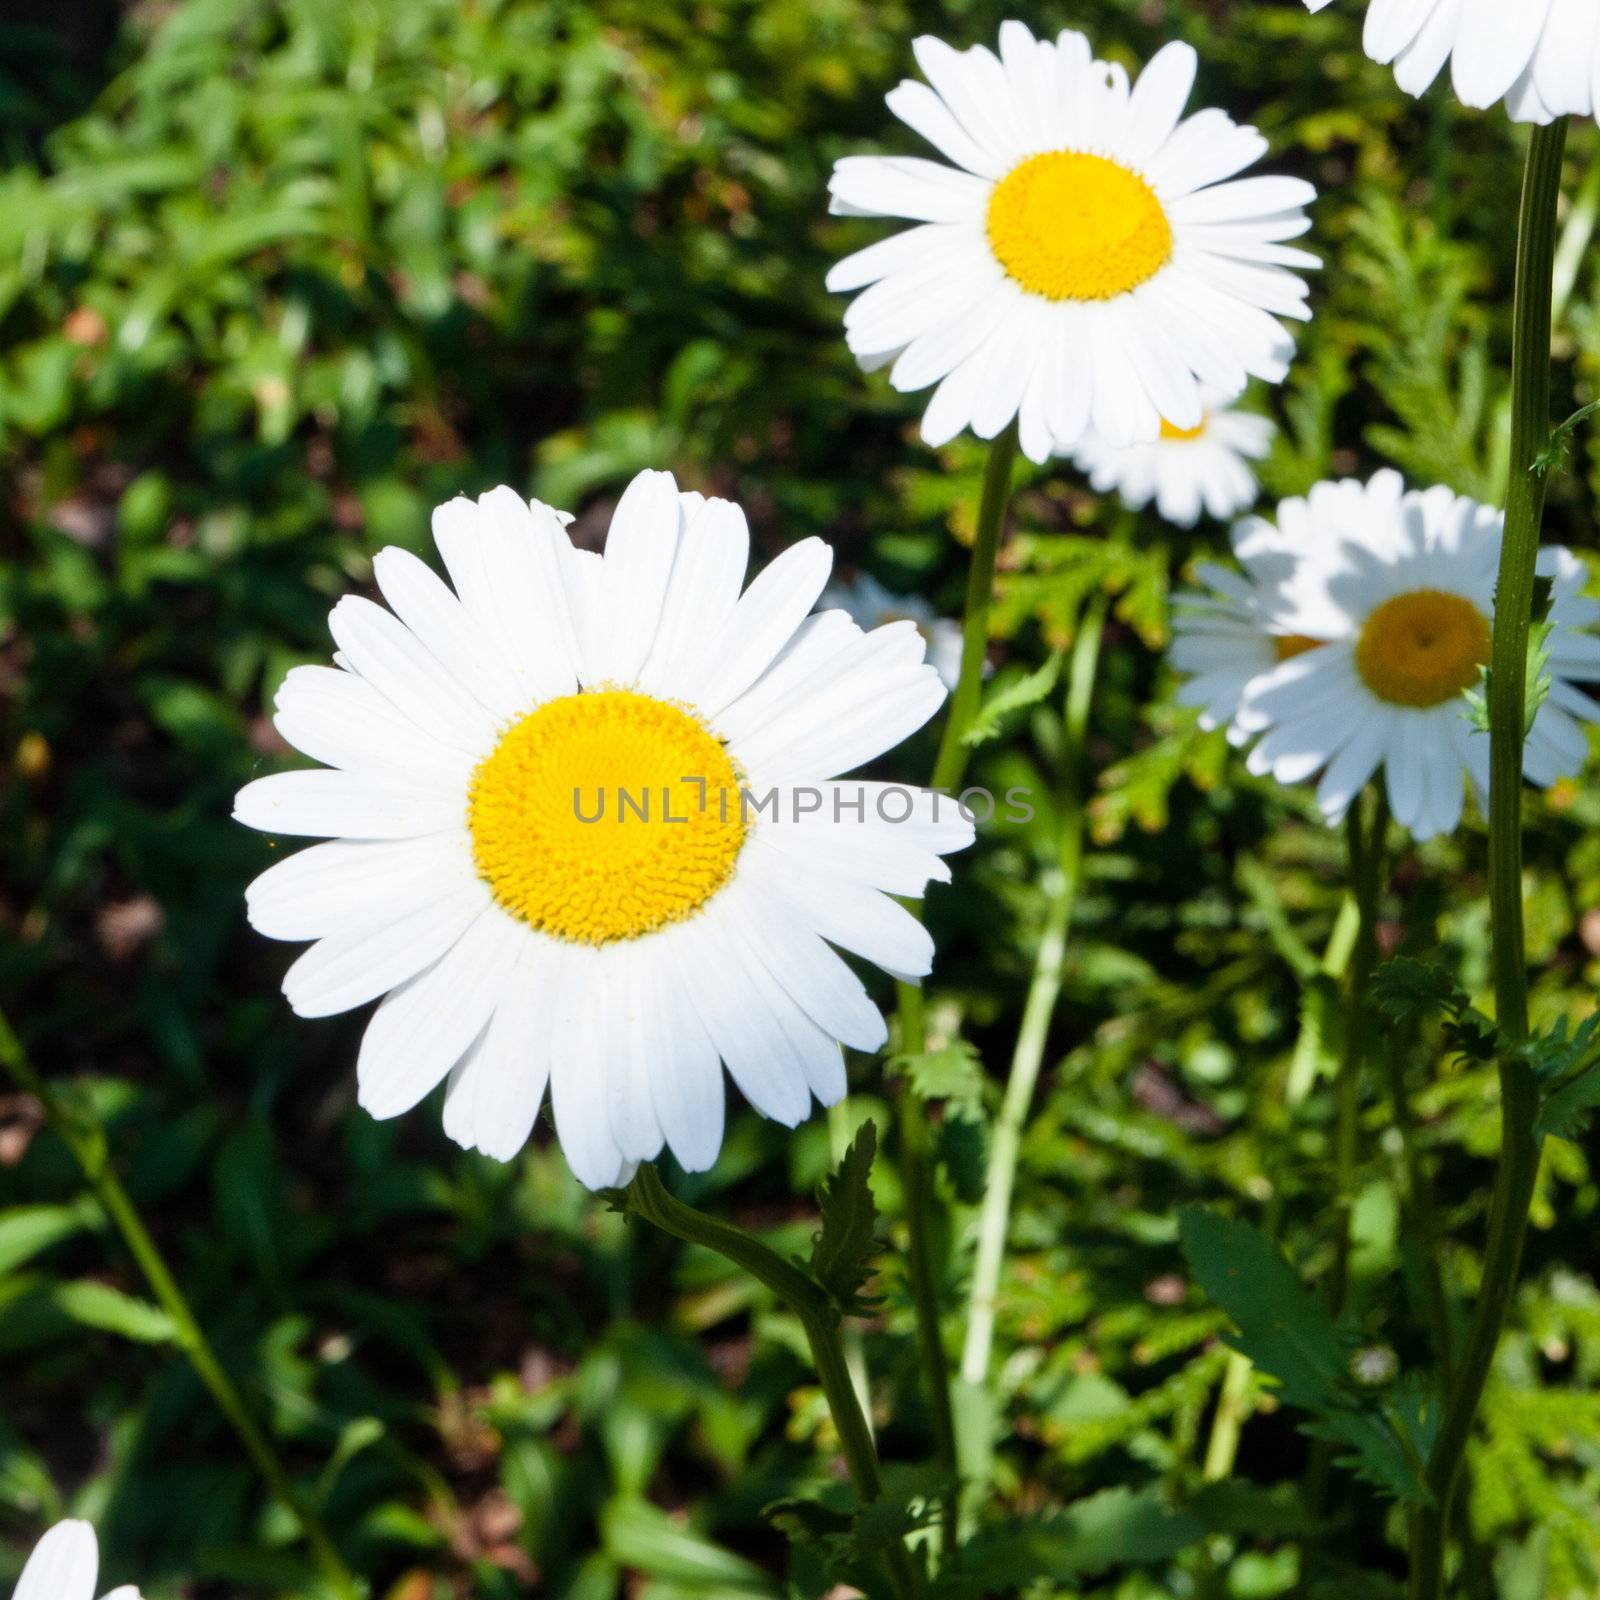 Oxeye daisy by melastmohican